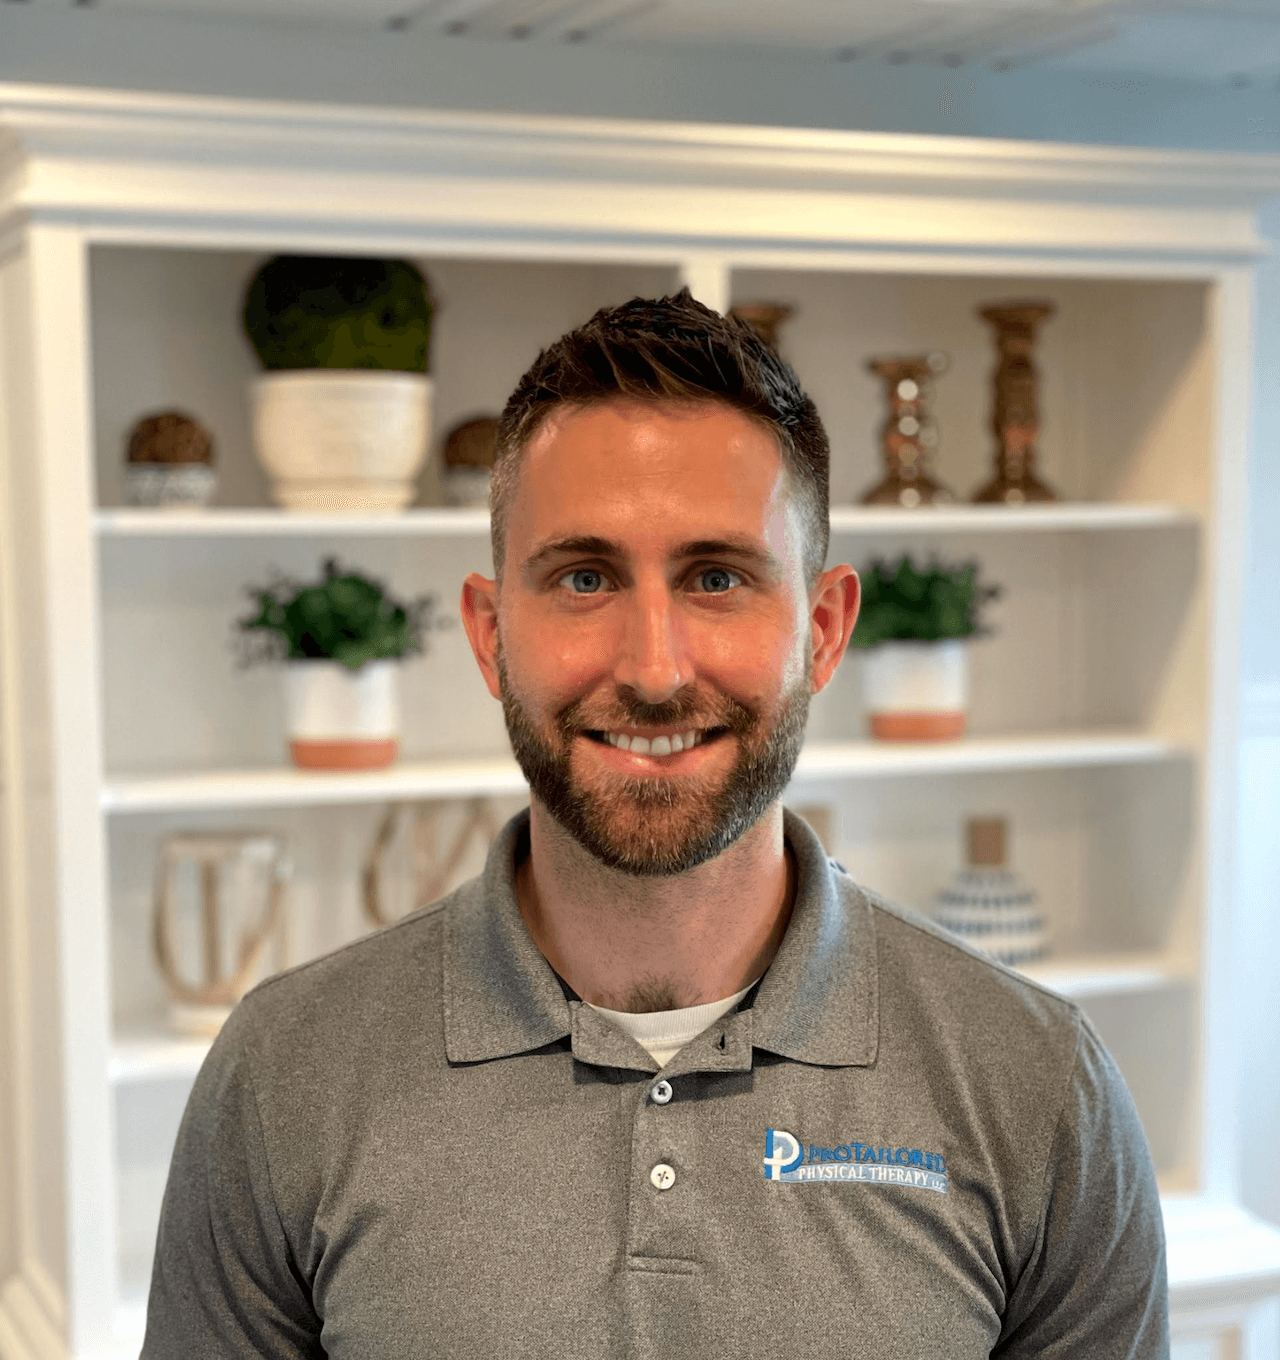 Jonathan-Evans-Physical-therapist-south-west-north-fort-wayne-in